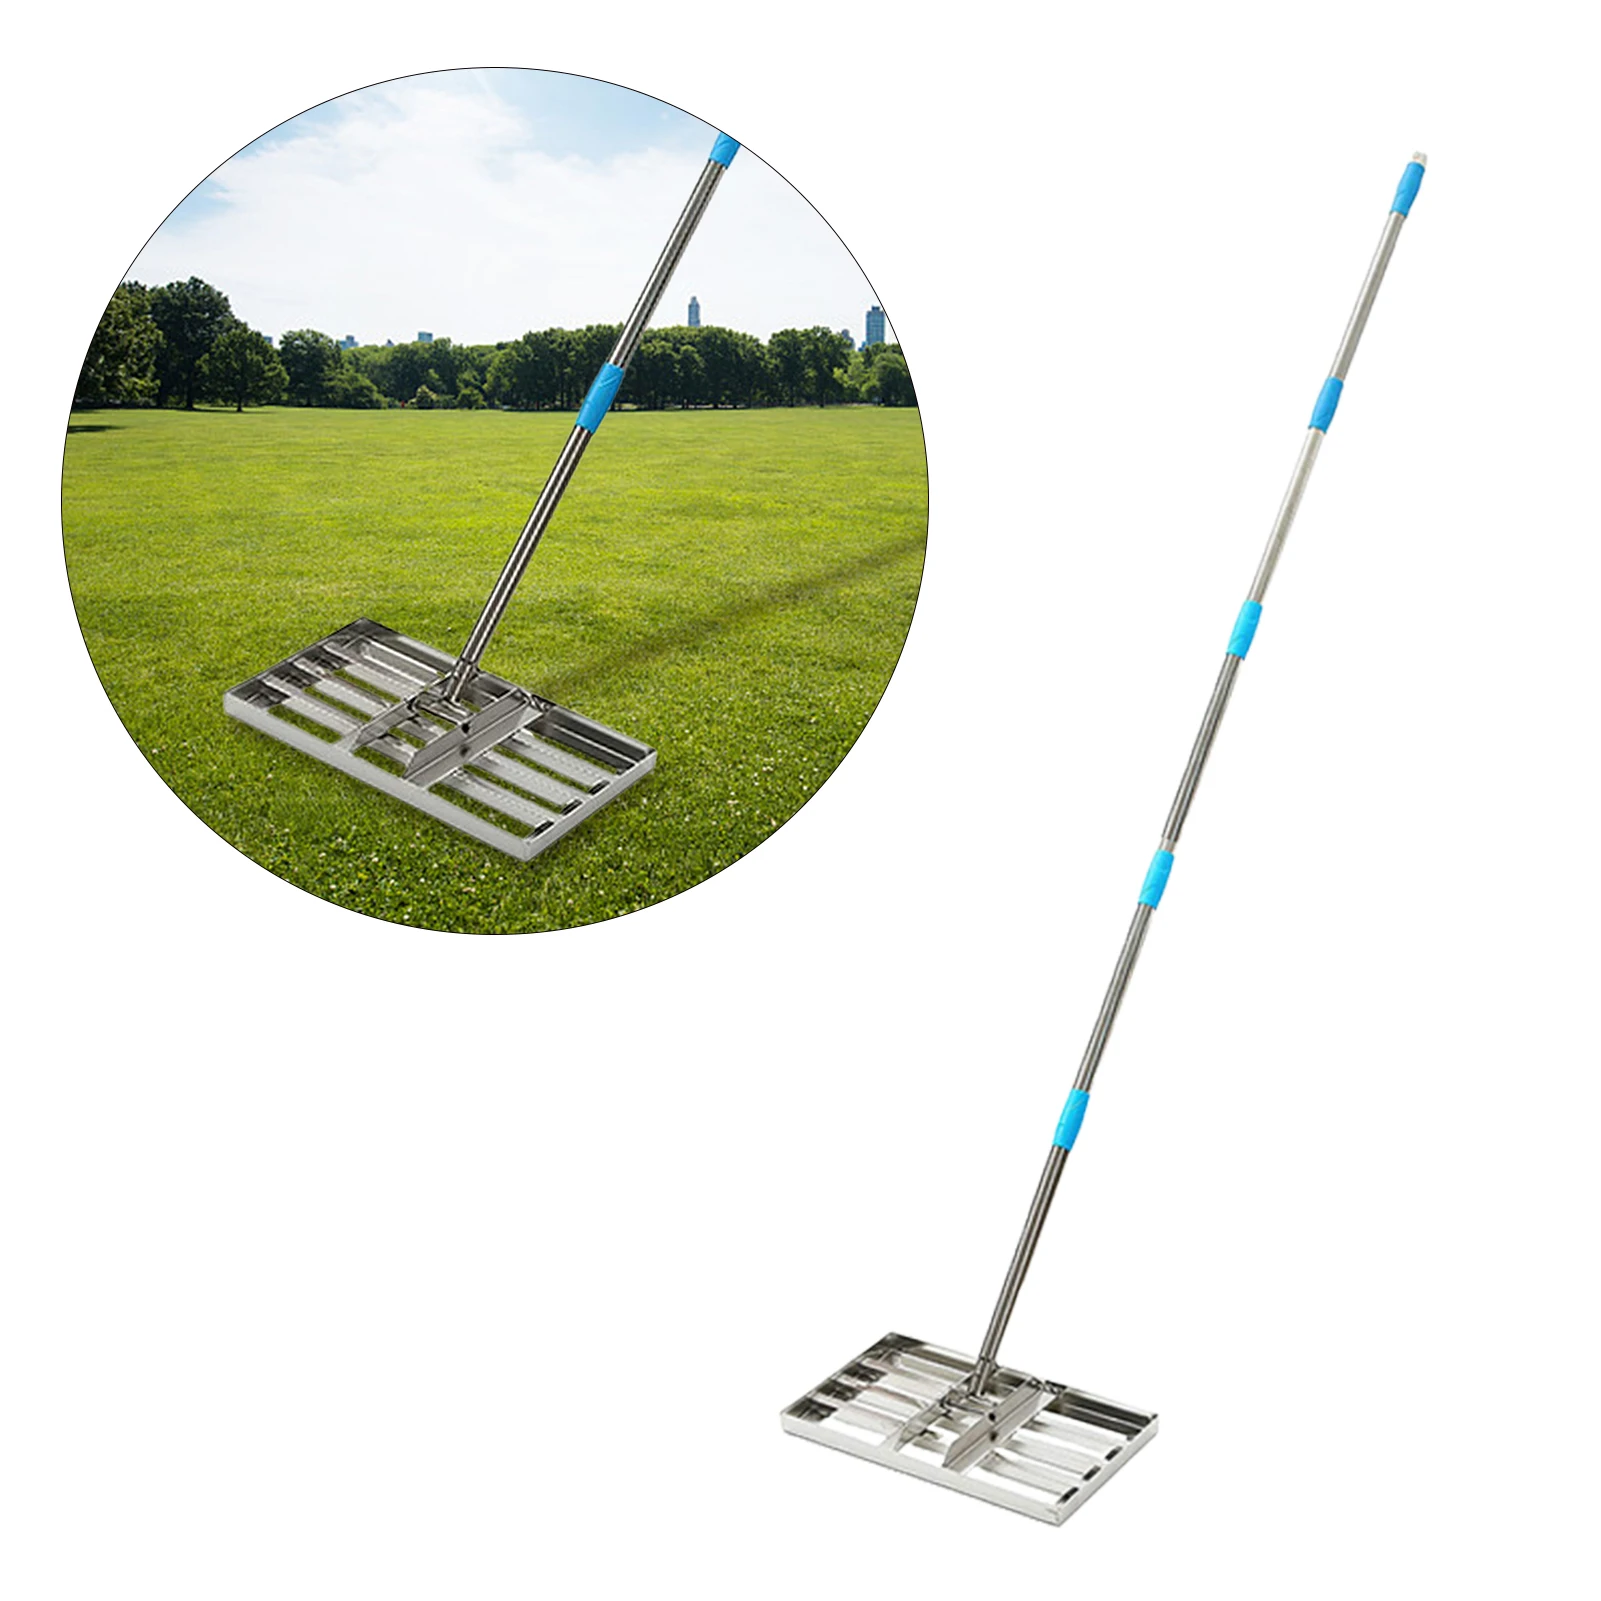 Adjustable Lawn Leveling Rake Lawn Leveler Garden Grass Finishing Soil Level Tool With Stainless Steel Pole For Yard Golf-lawn